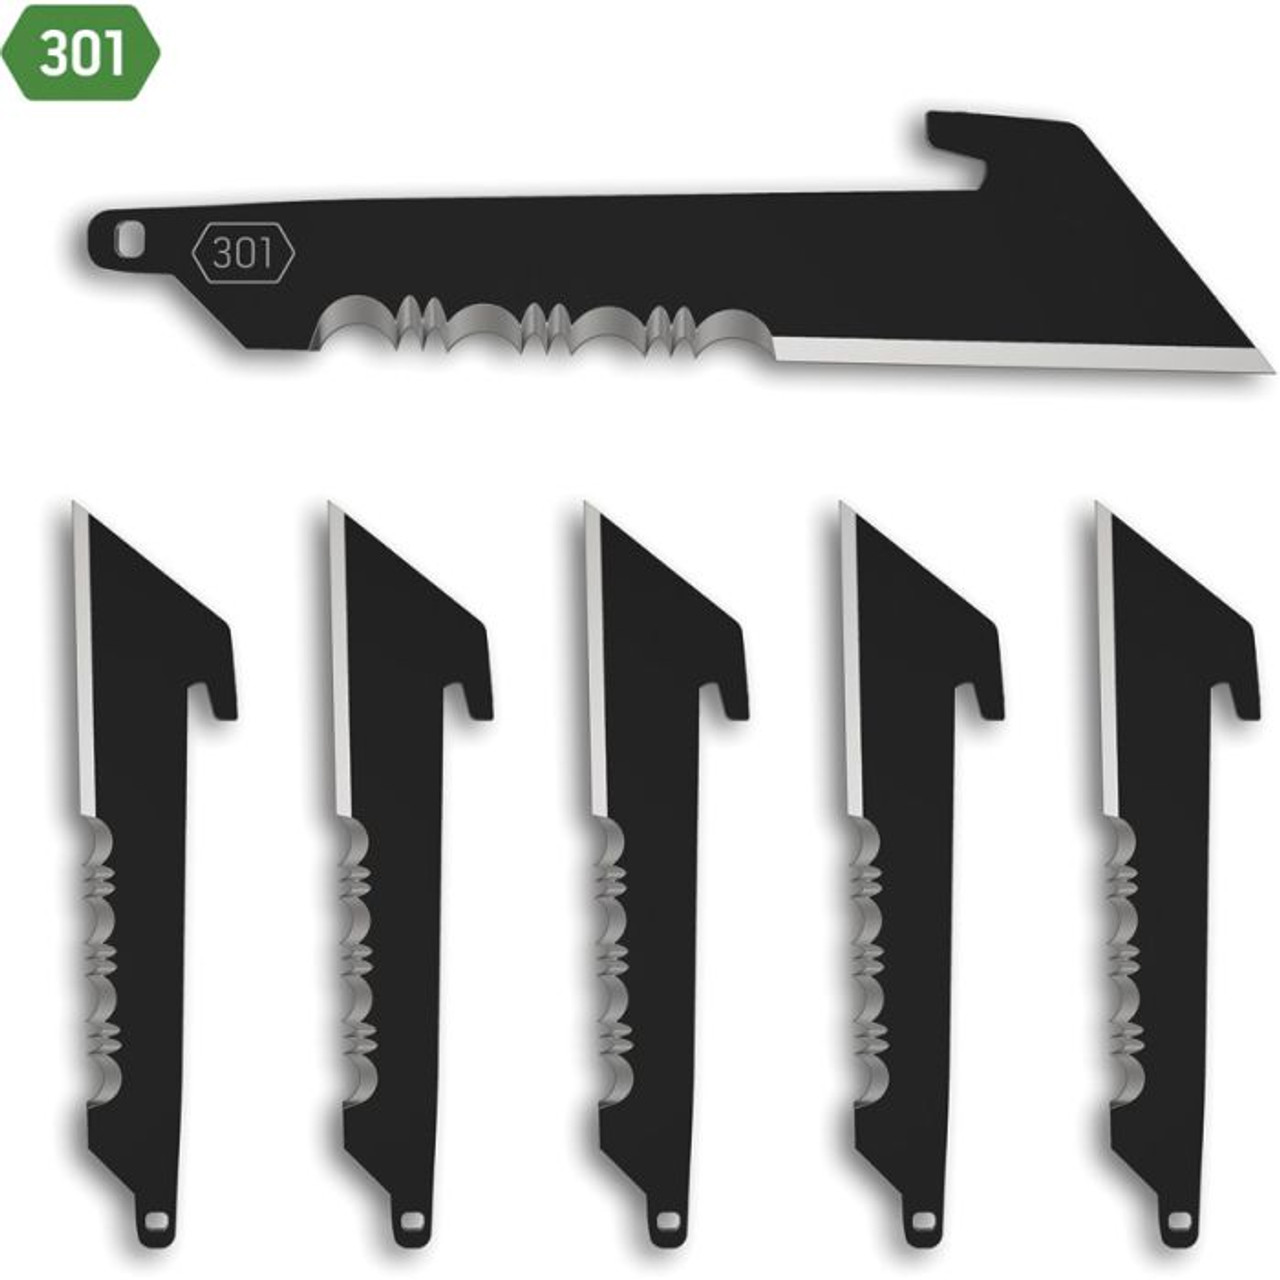 Outdoor Edge Replacement Blades (6 PK) 3.0" 420J2 Blk Japanese Stainless Steel Partially Serrated Replacement Blades -301